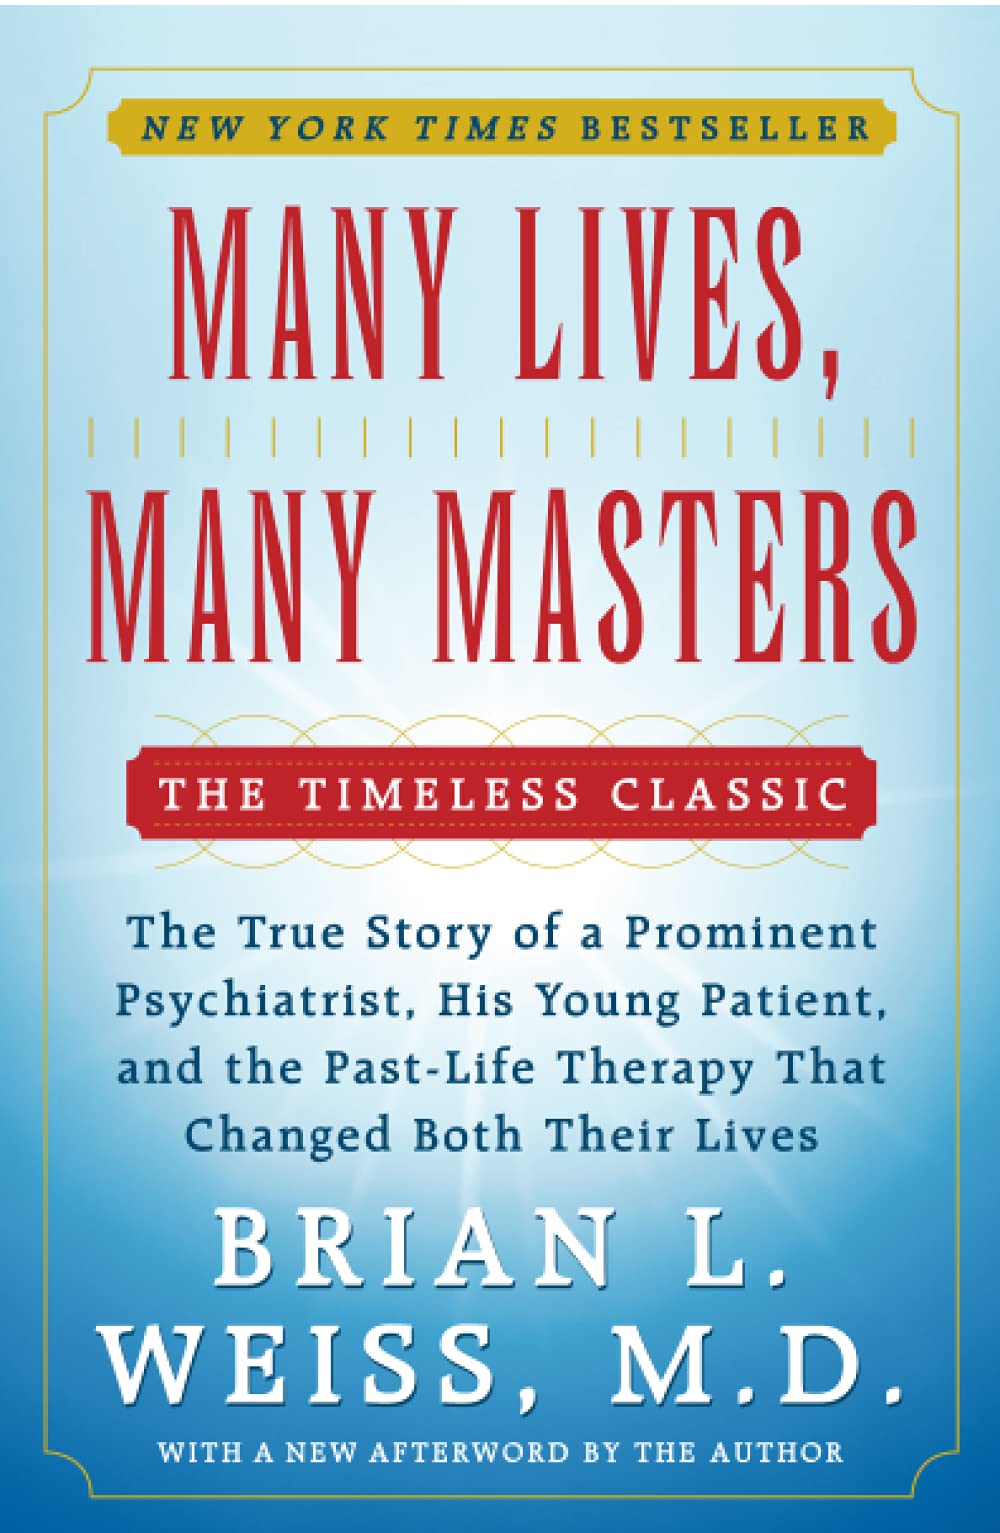 Many Lives, Many Masters- The True Story of a Prominent Psychiatrist, His Young Patient, and the Past-Life Therapy That Changed Both Their Lives